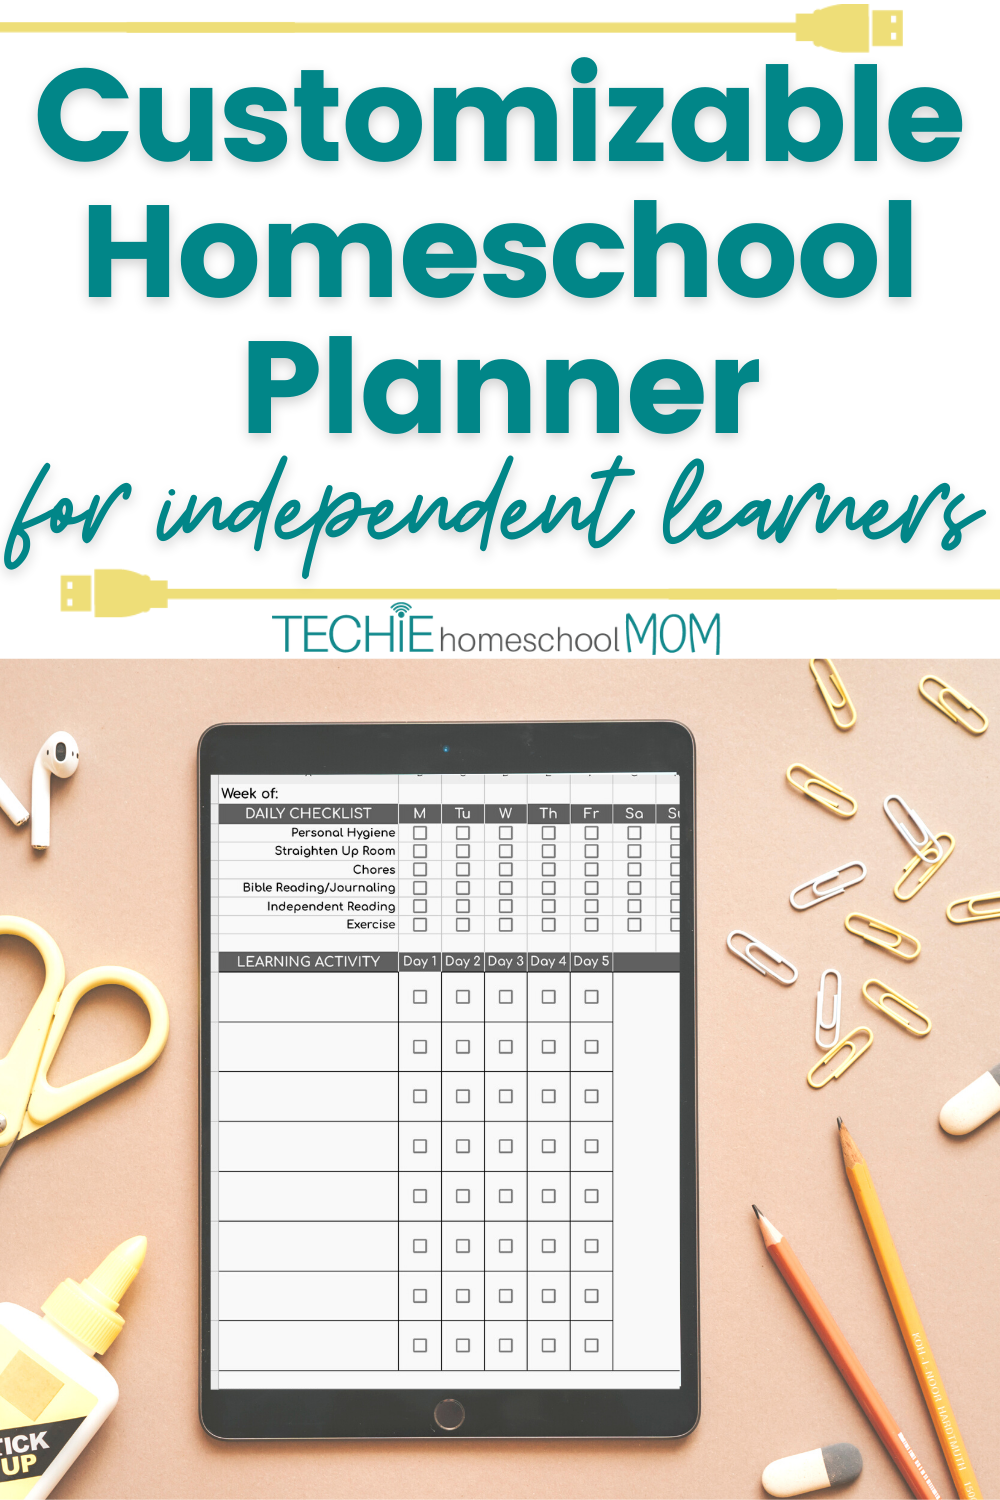 Want a customizable, yet simple, homeschool student planner to keep track of whether your kids are getting their homeschool work done or not? Check out how to use my Digital Student Planner template.